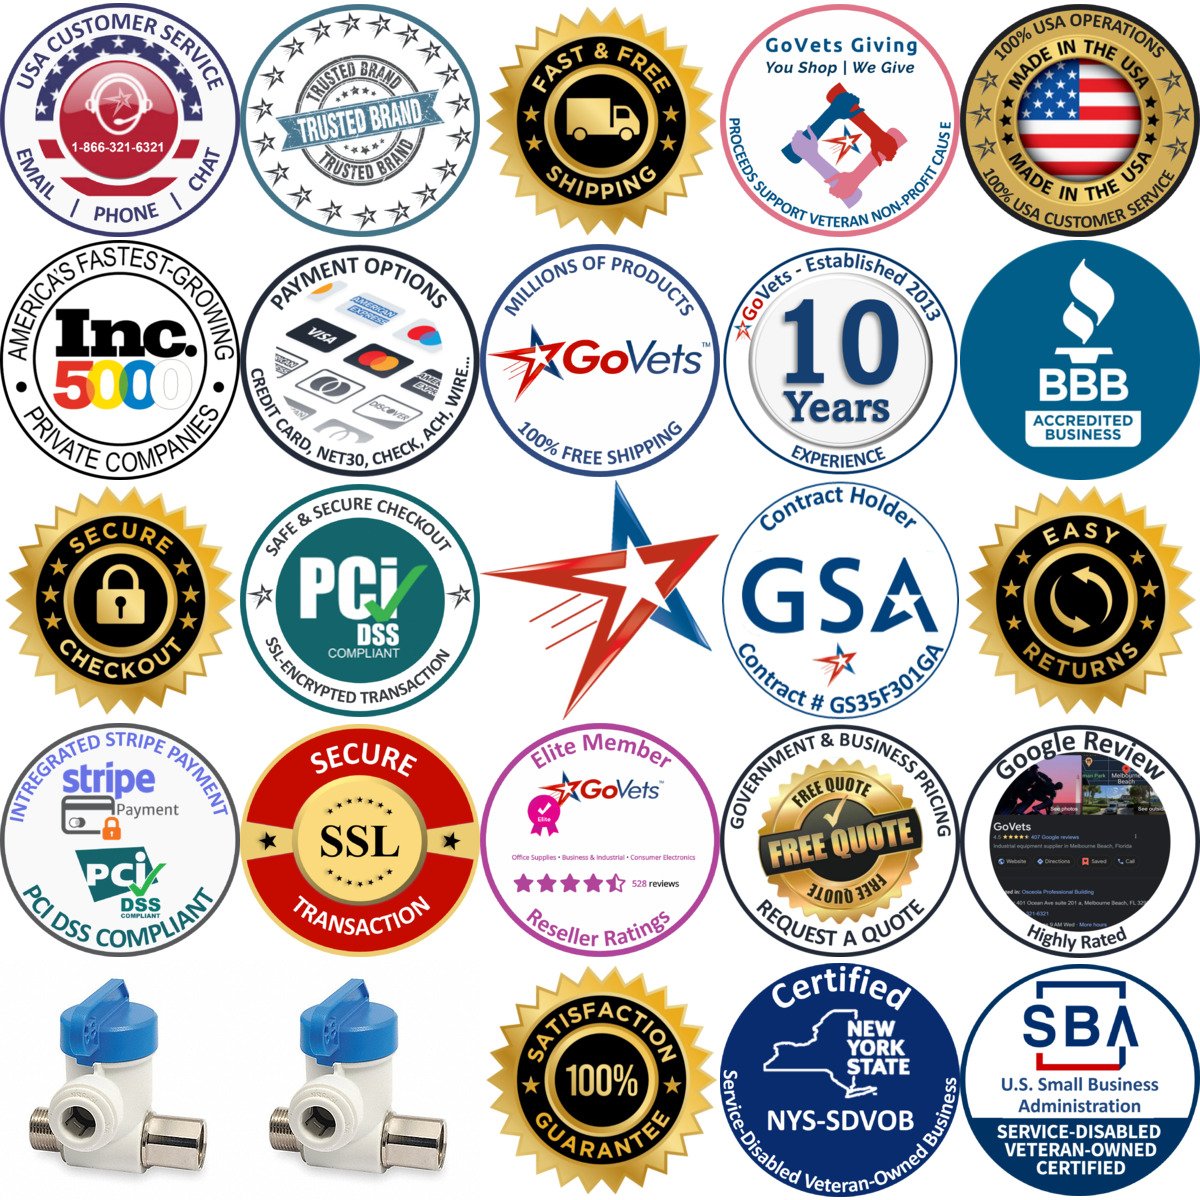 A selection of Faucet and Supply Stop Adapters products on GoVets